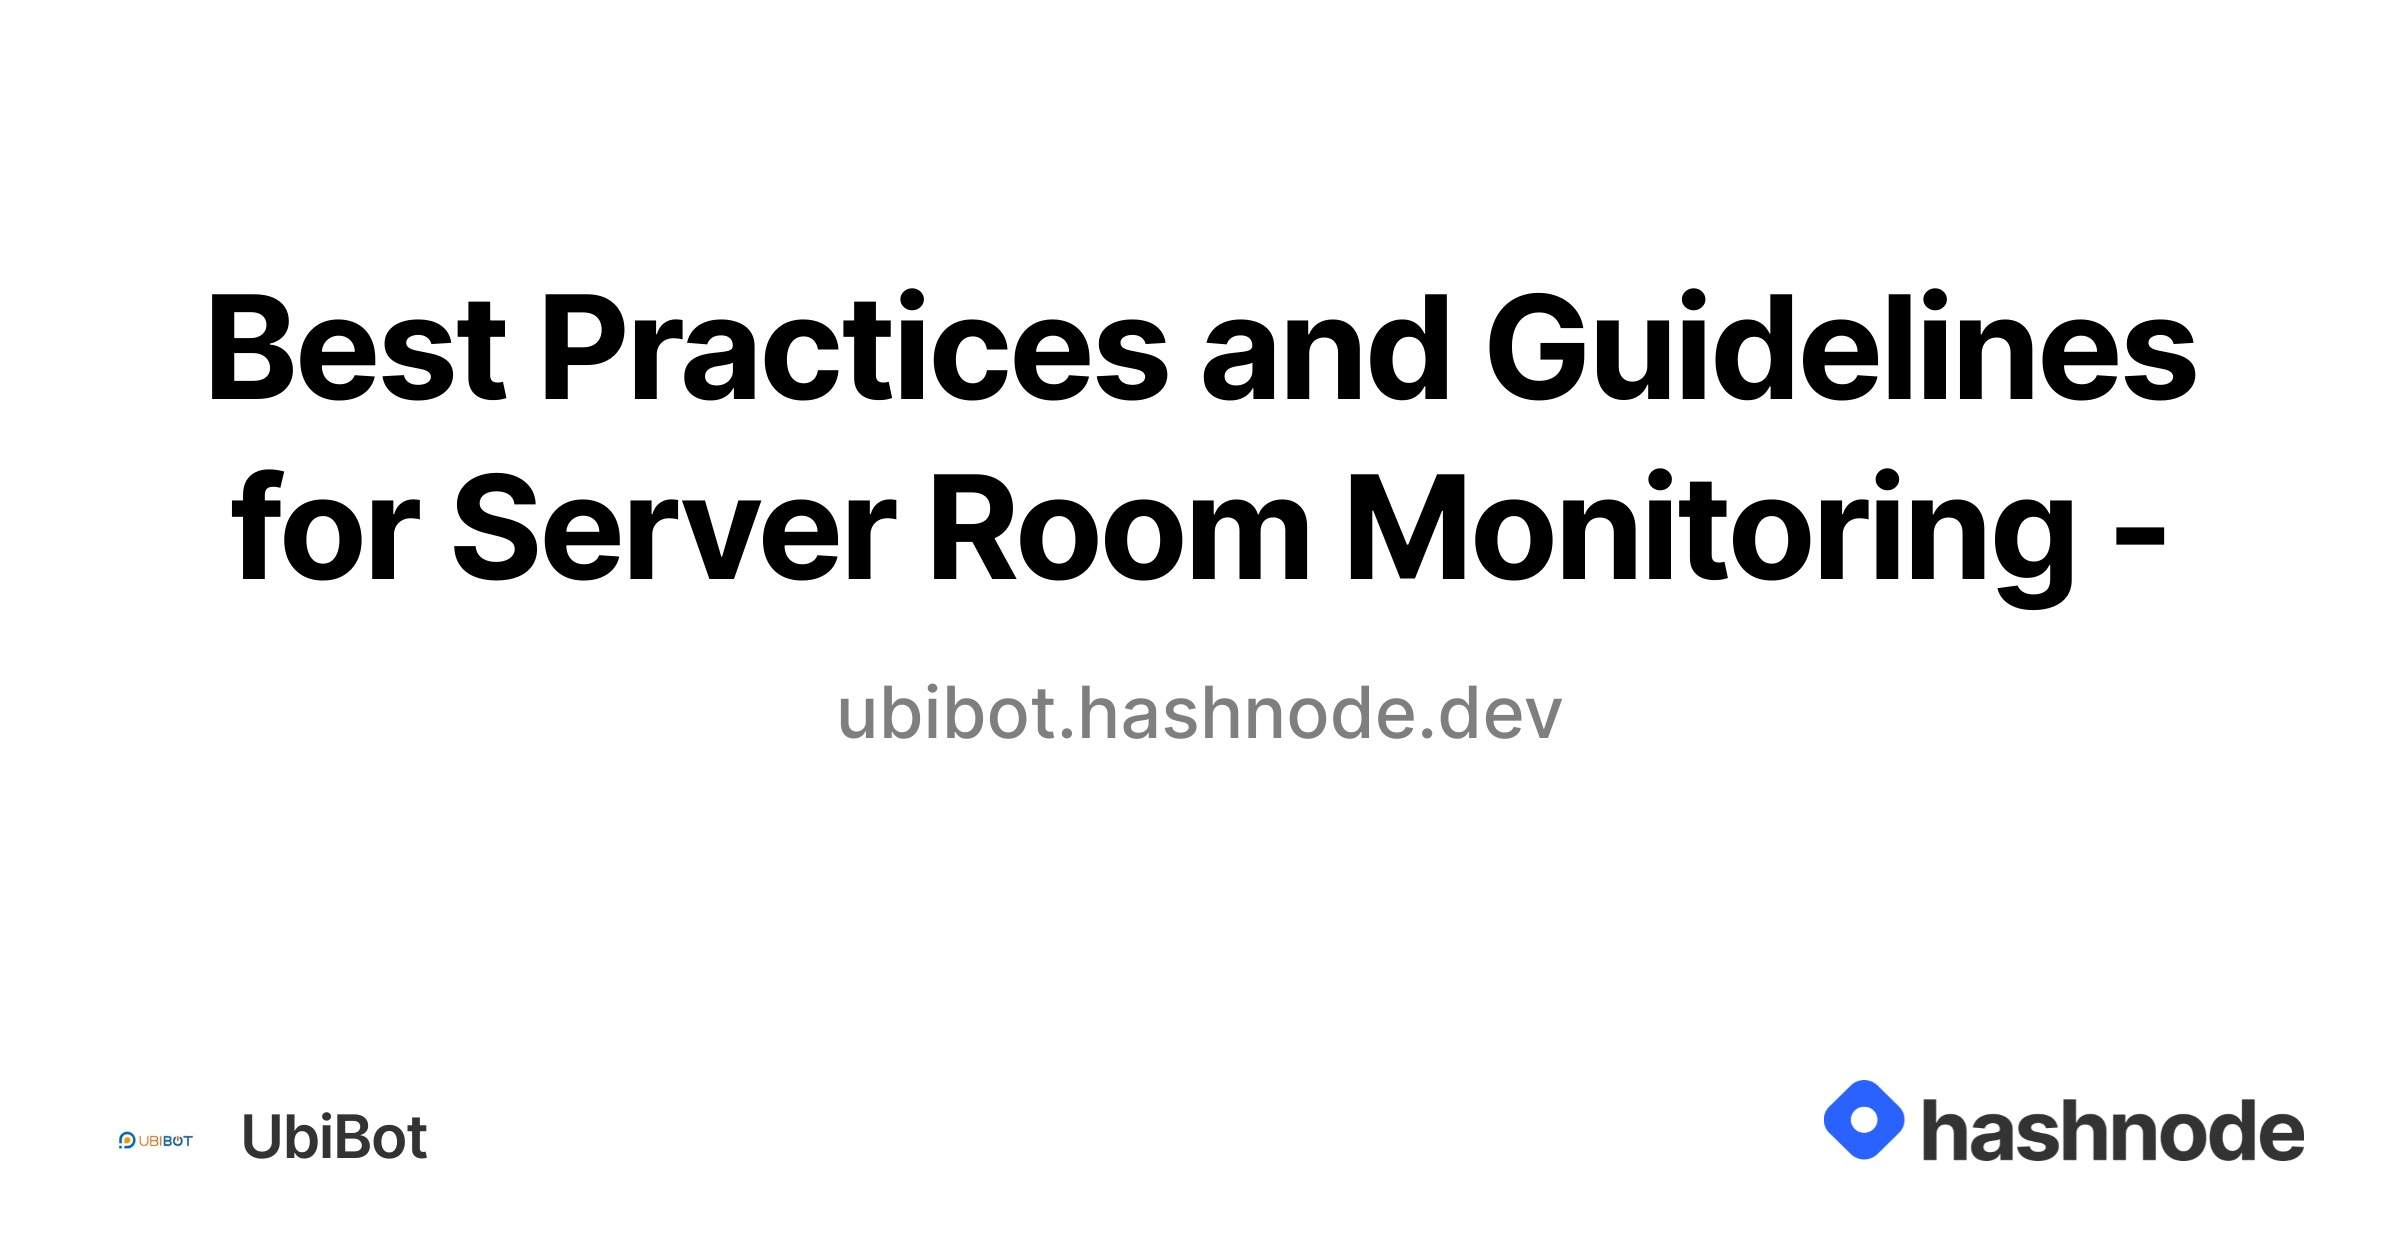 Best Practices and Guidelines for Server Room Monitoring -